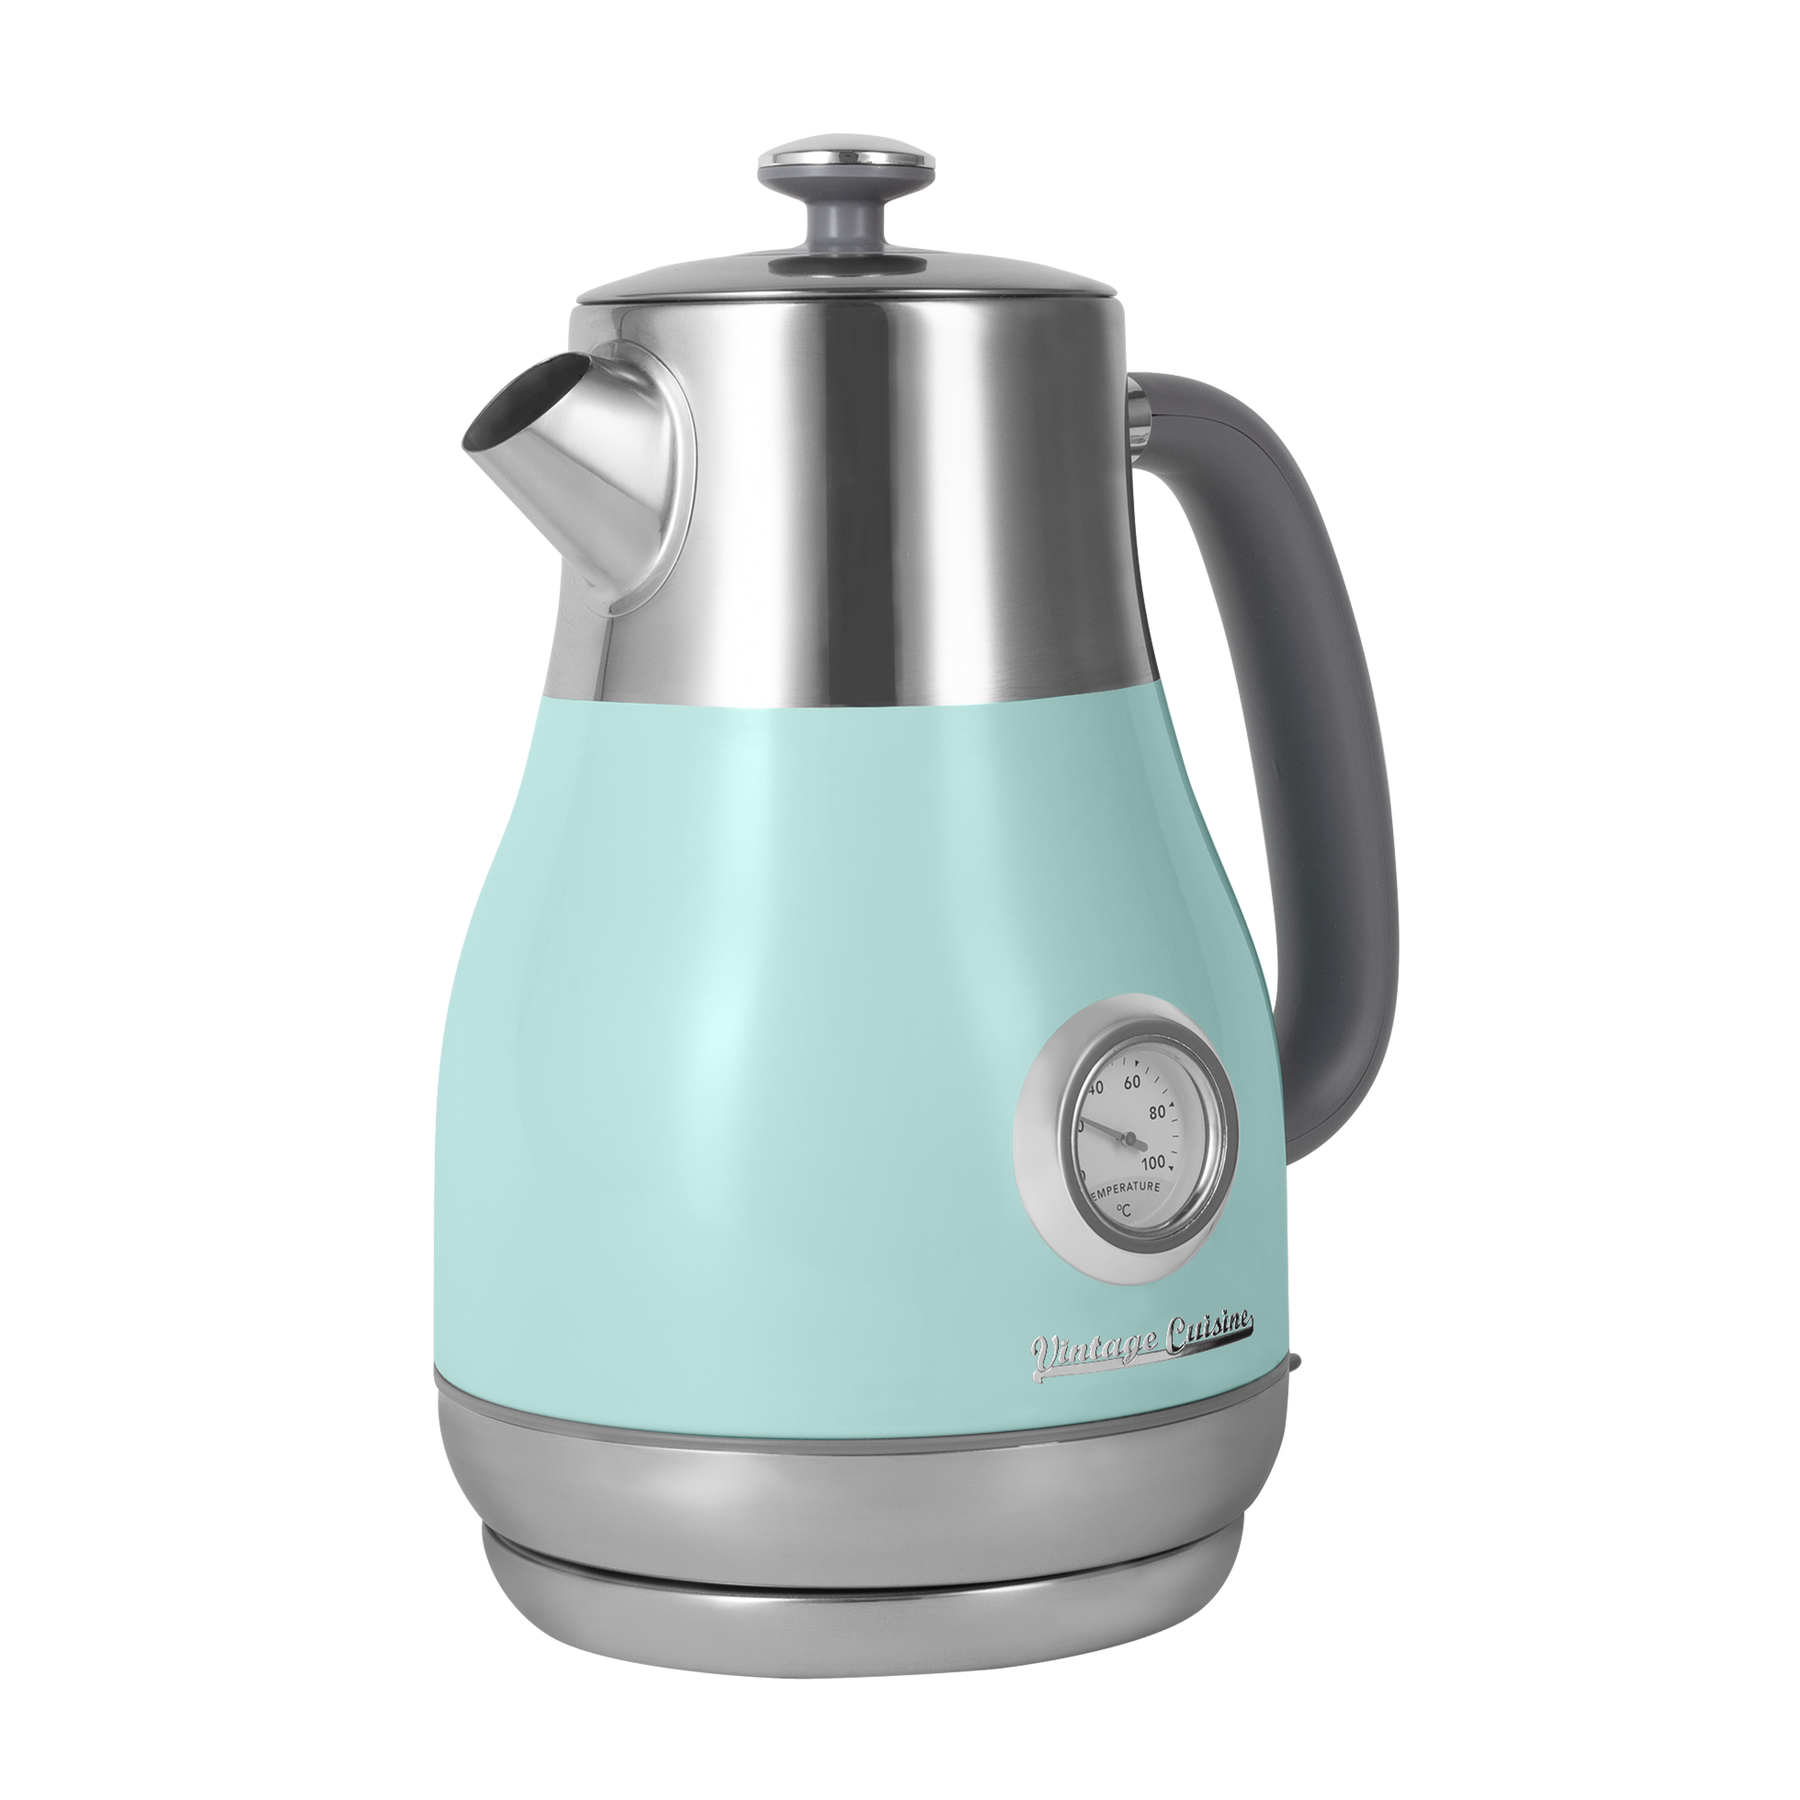 Retro slim electric kettle with thermometer Vintage Cuisine